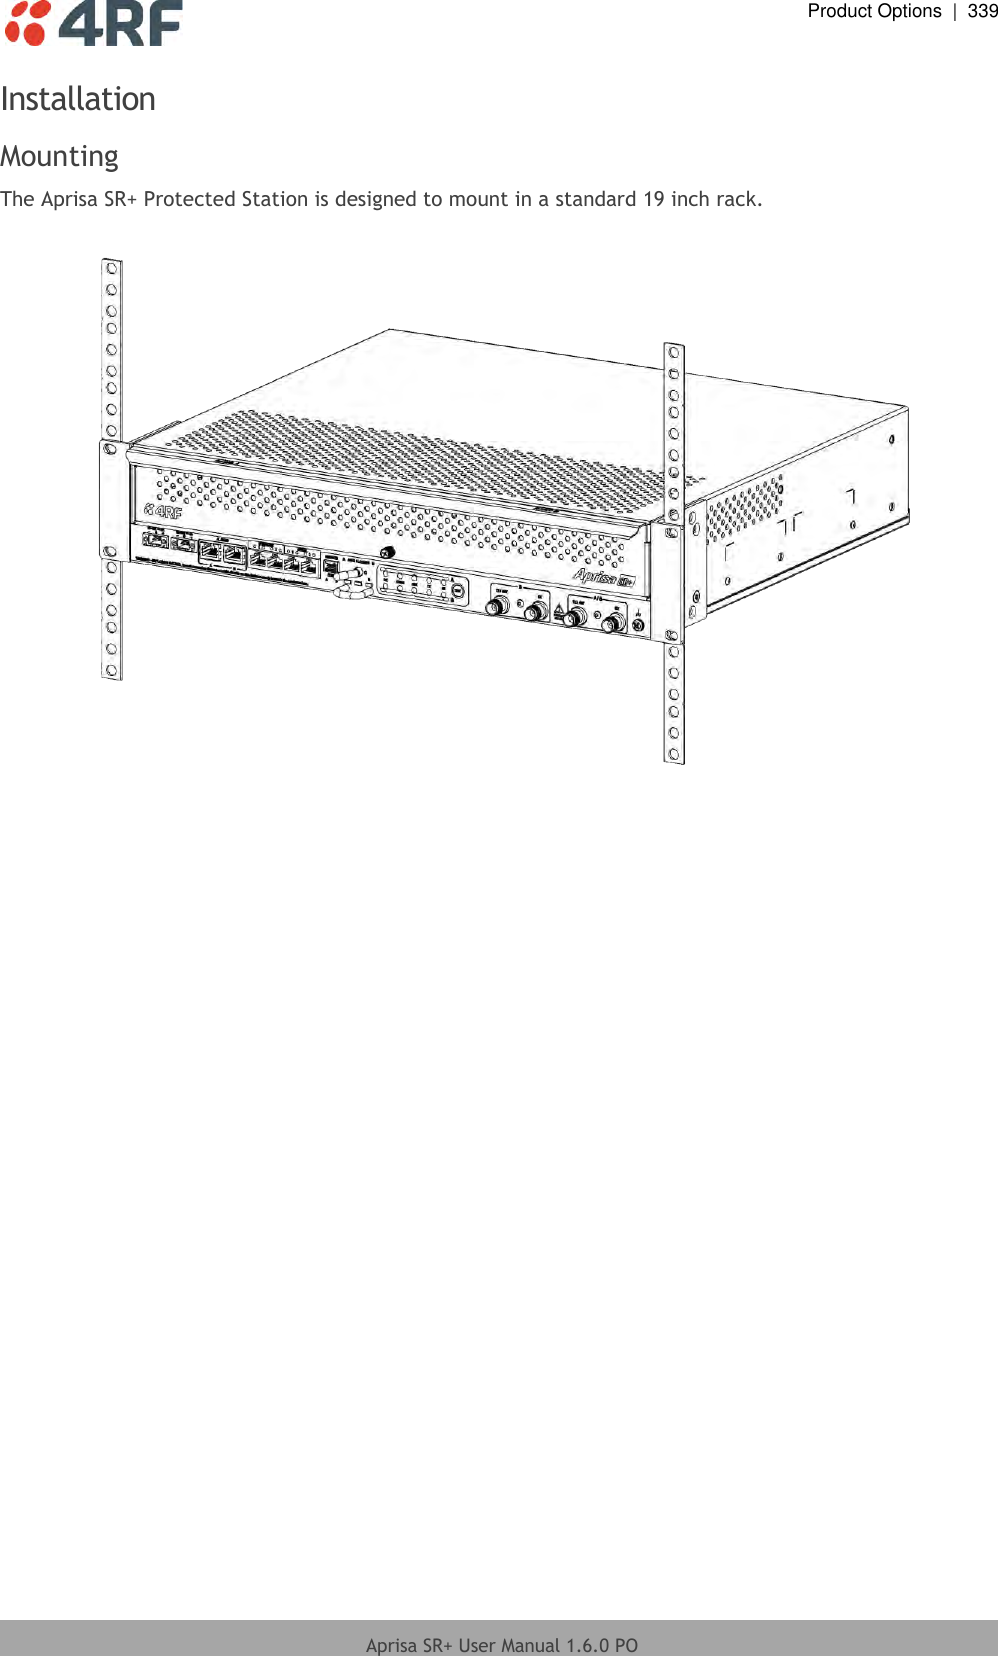  Product Options  |  339  Aprisa SR+ User Manual 1.6.0 PO  Installation Mounting The Aprisa SR+ Protected Station is designed to mount in a standard 19 inch rack.   